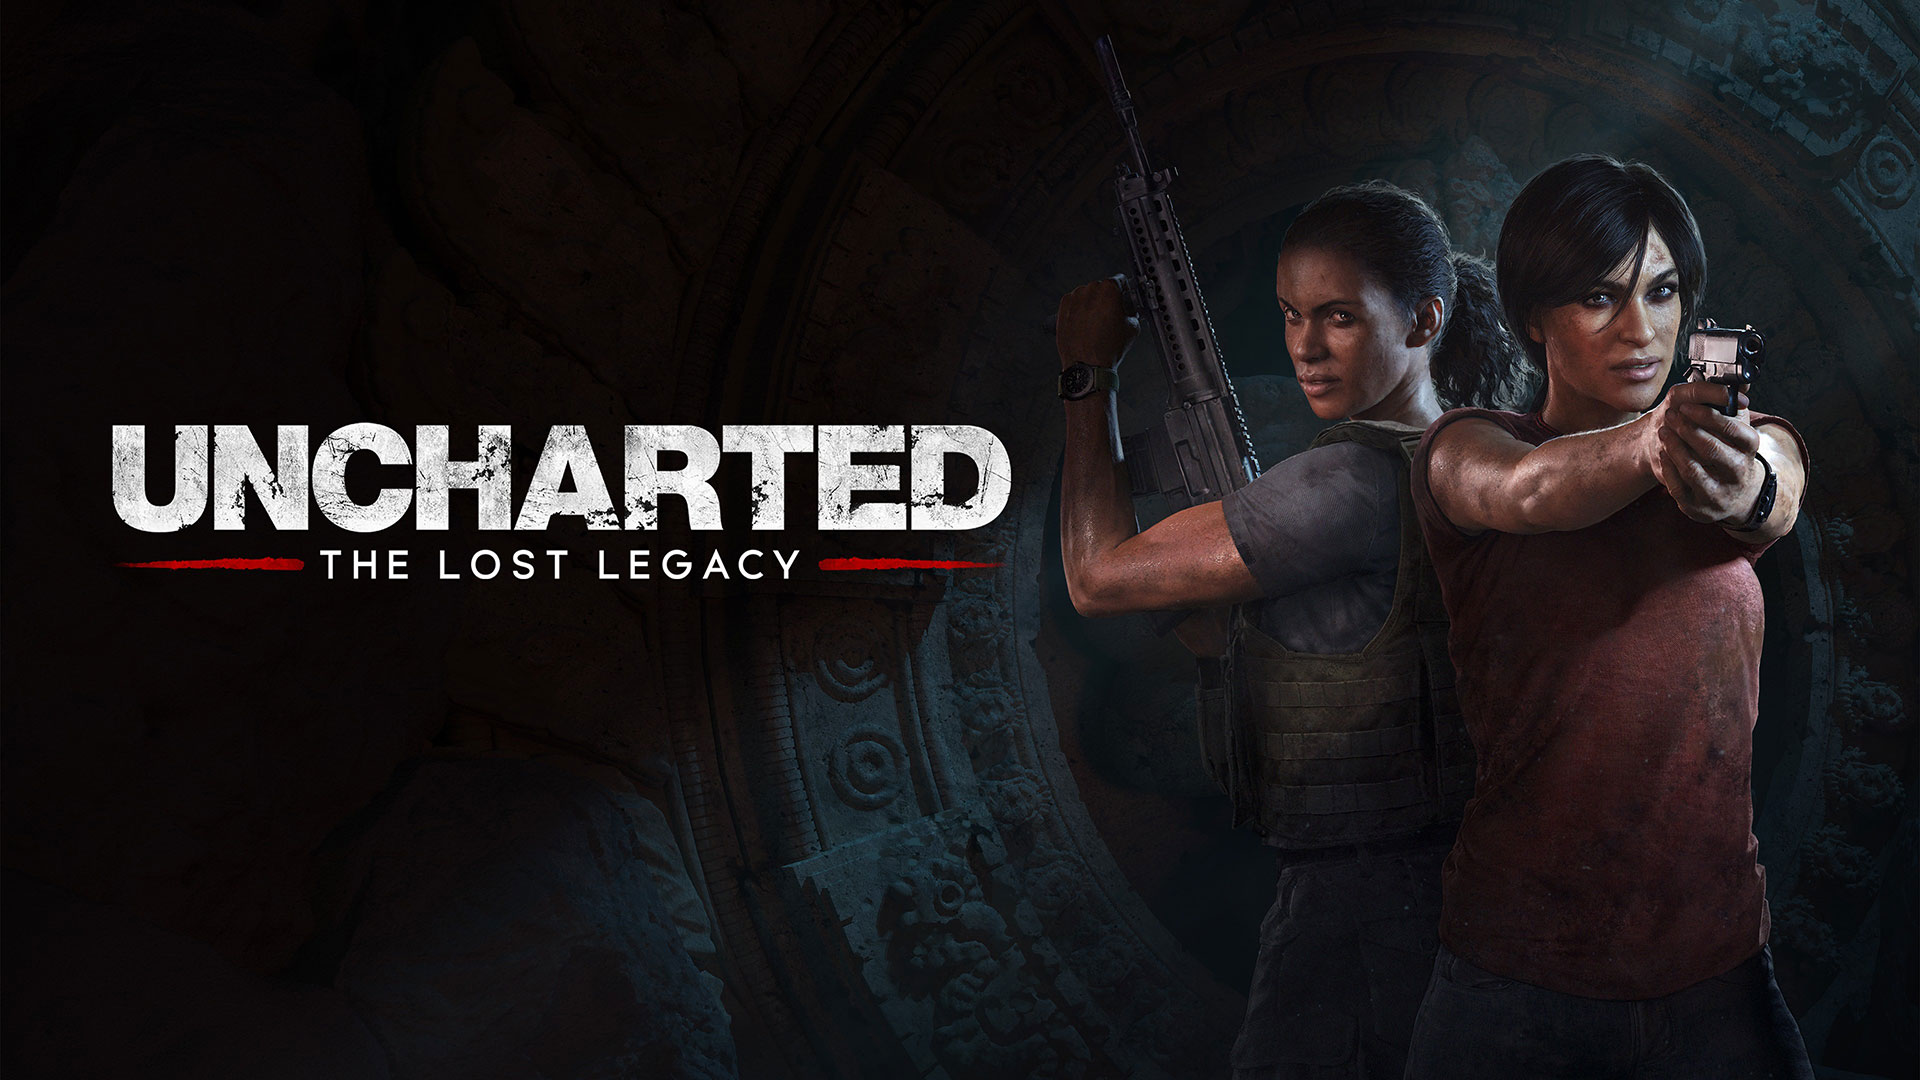 Uncharted: The Lost Legacy: Every Trophy Available